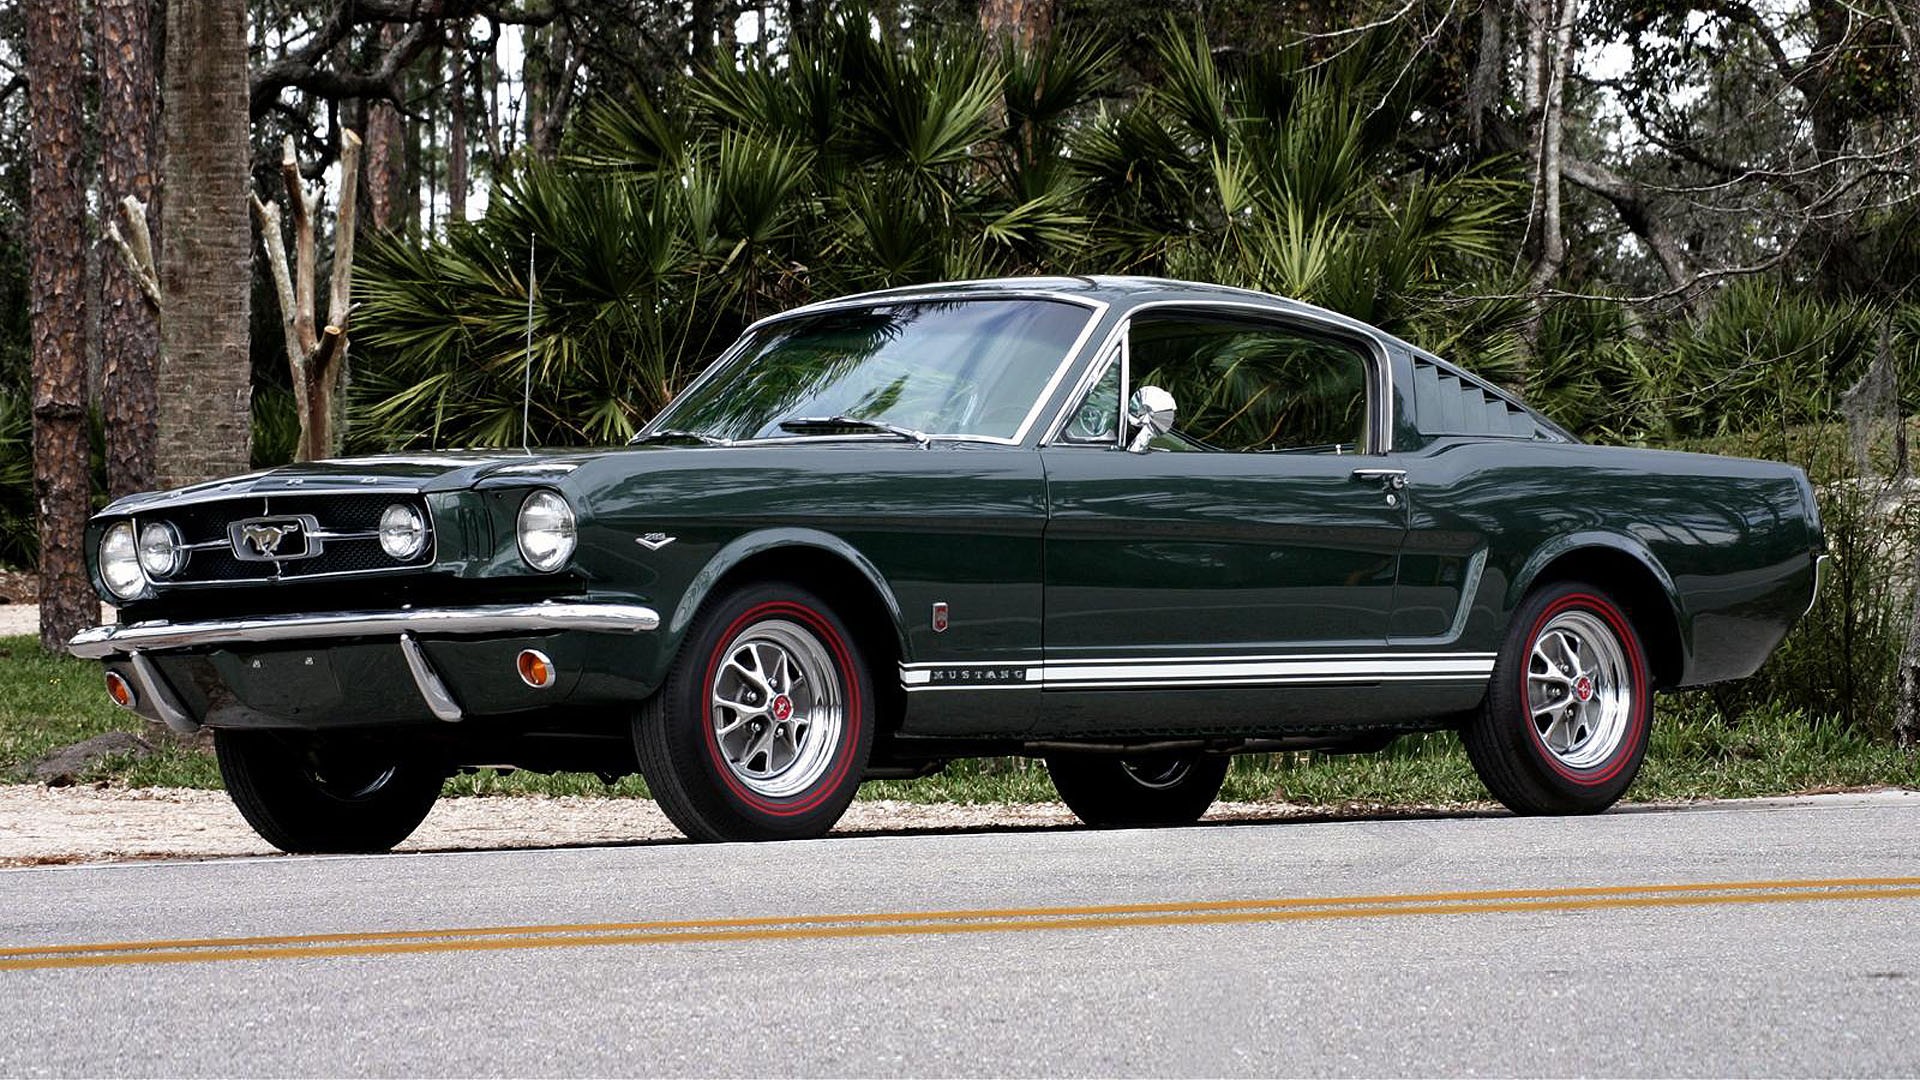 General 1920x1080 Ford Mustang muscle cars green cars car classic car Ford vehicle American cars